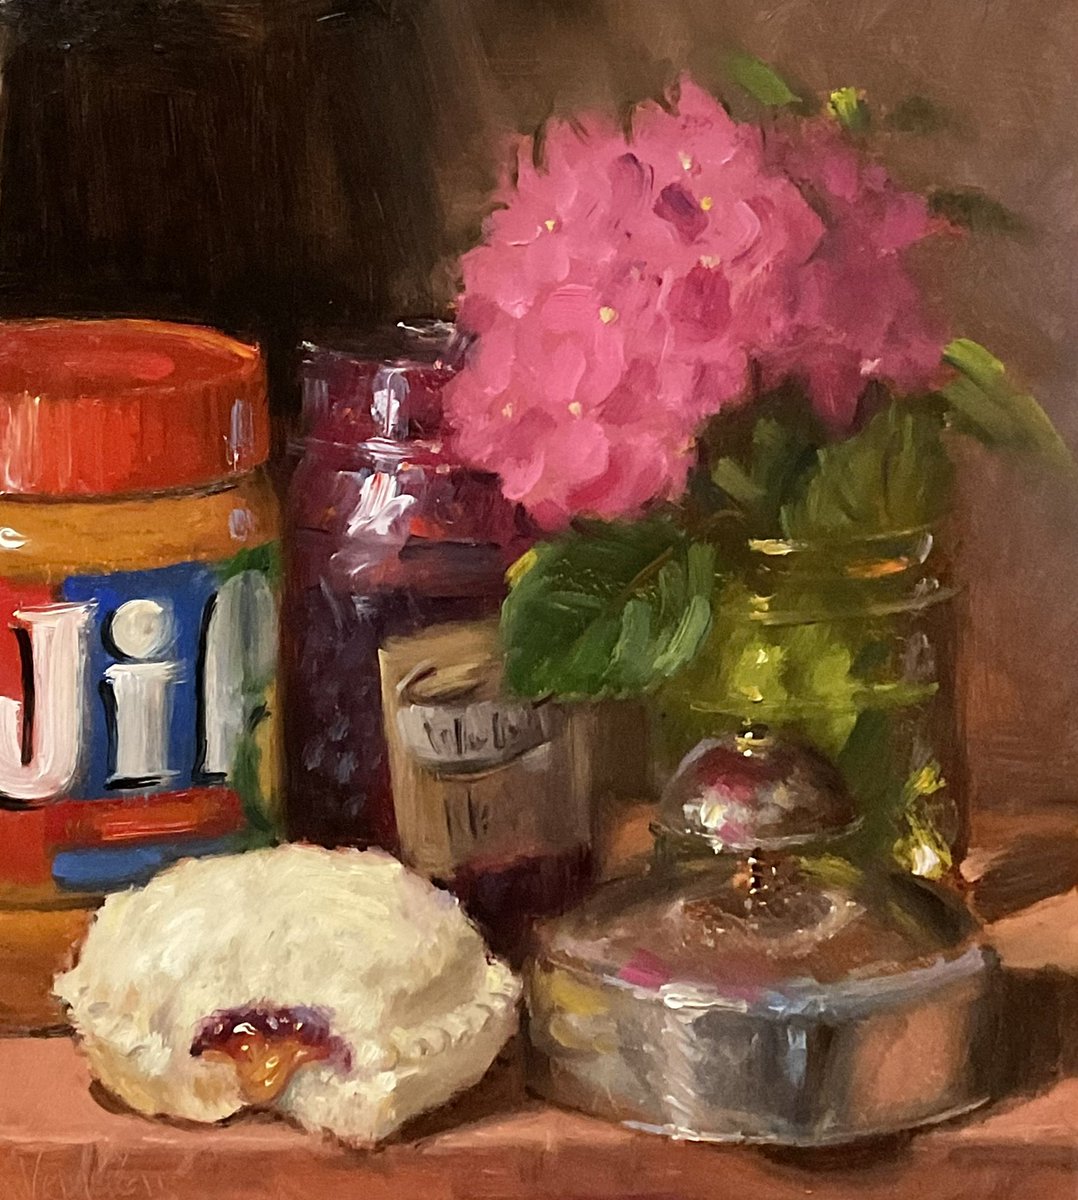 My oil painting of a homemade Uncrustable